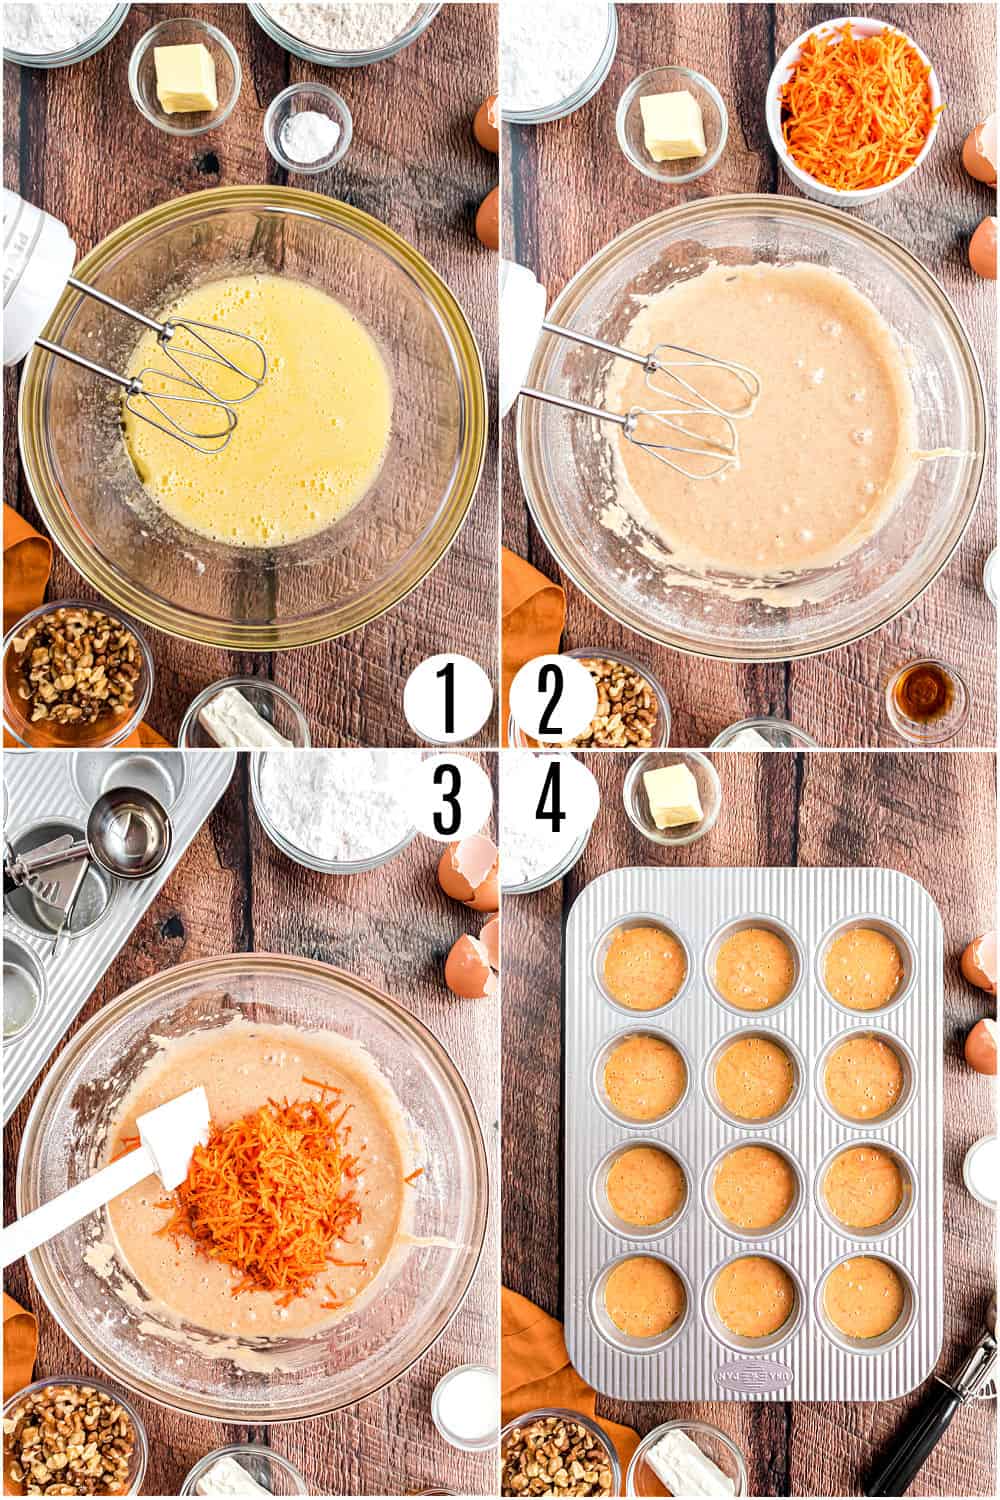 Step by step photos showing how to make carrot cake muffins.